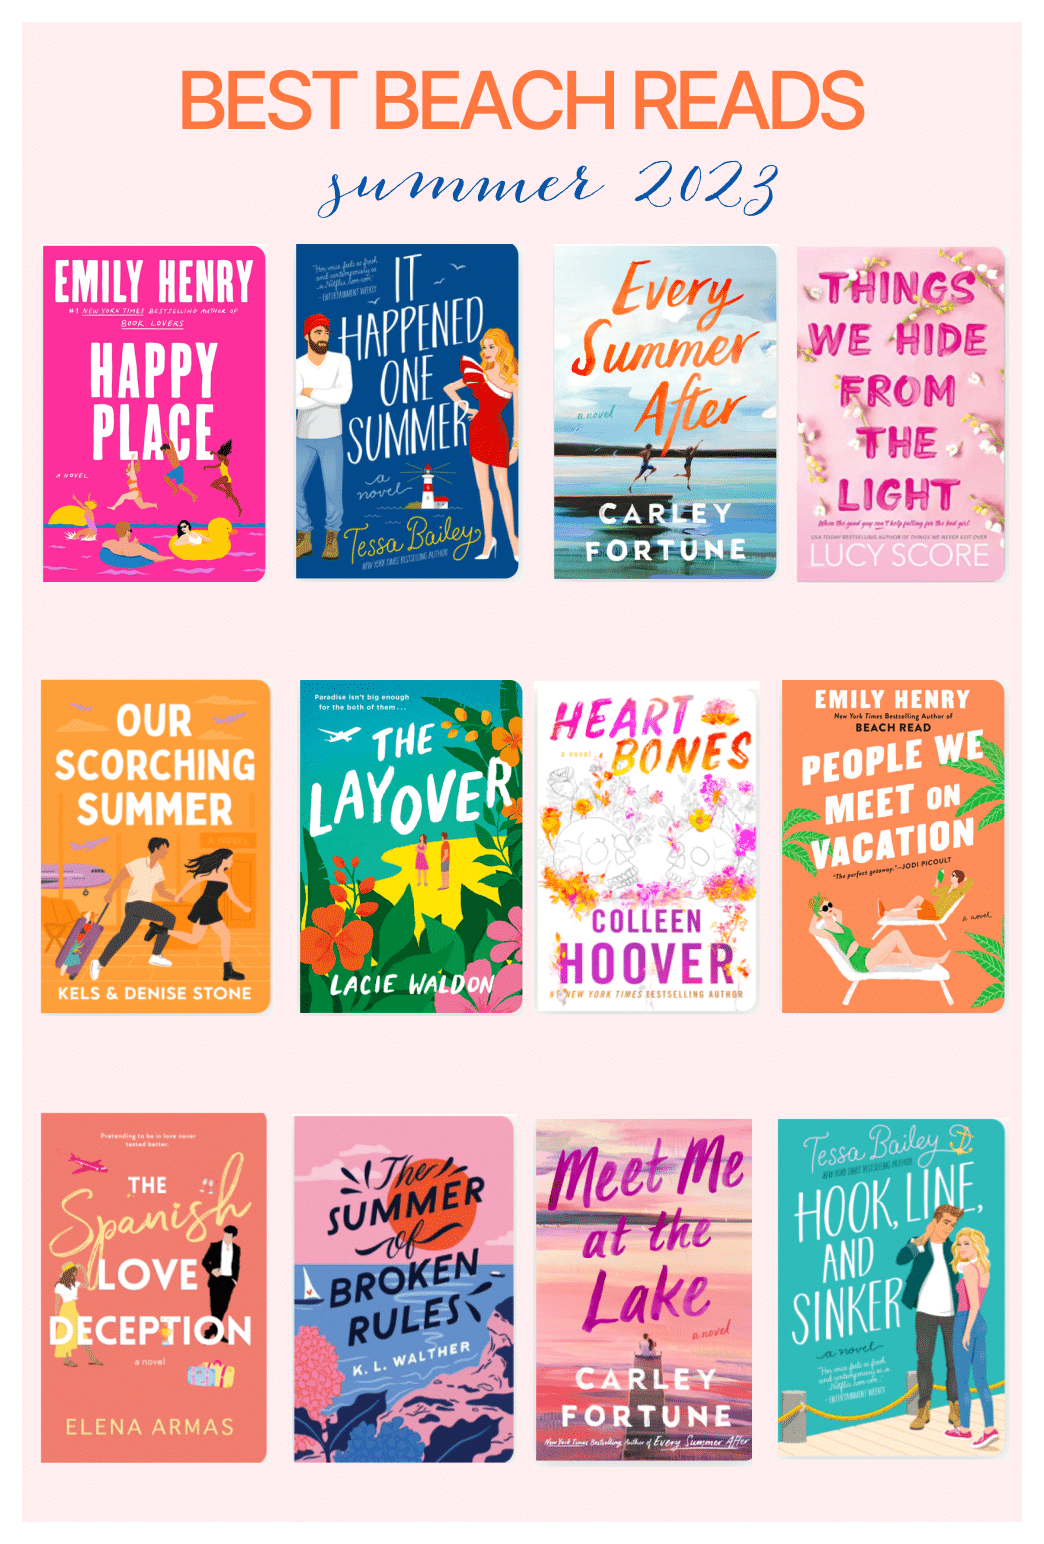 Best Beach Reads For Summer of 2023. If you like the spice of Emily Henry and Colleen Hoover then you'll love this list of romance reads.